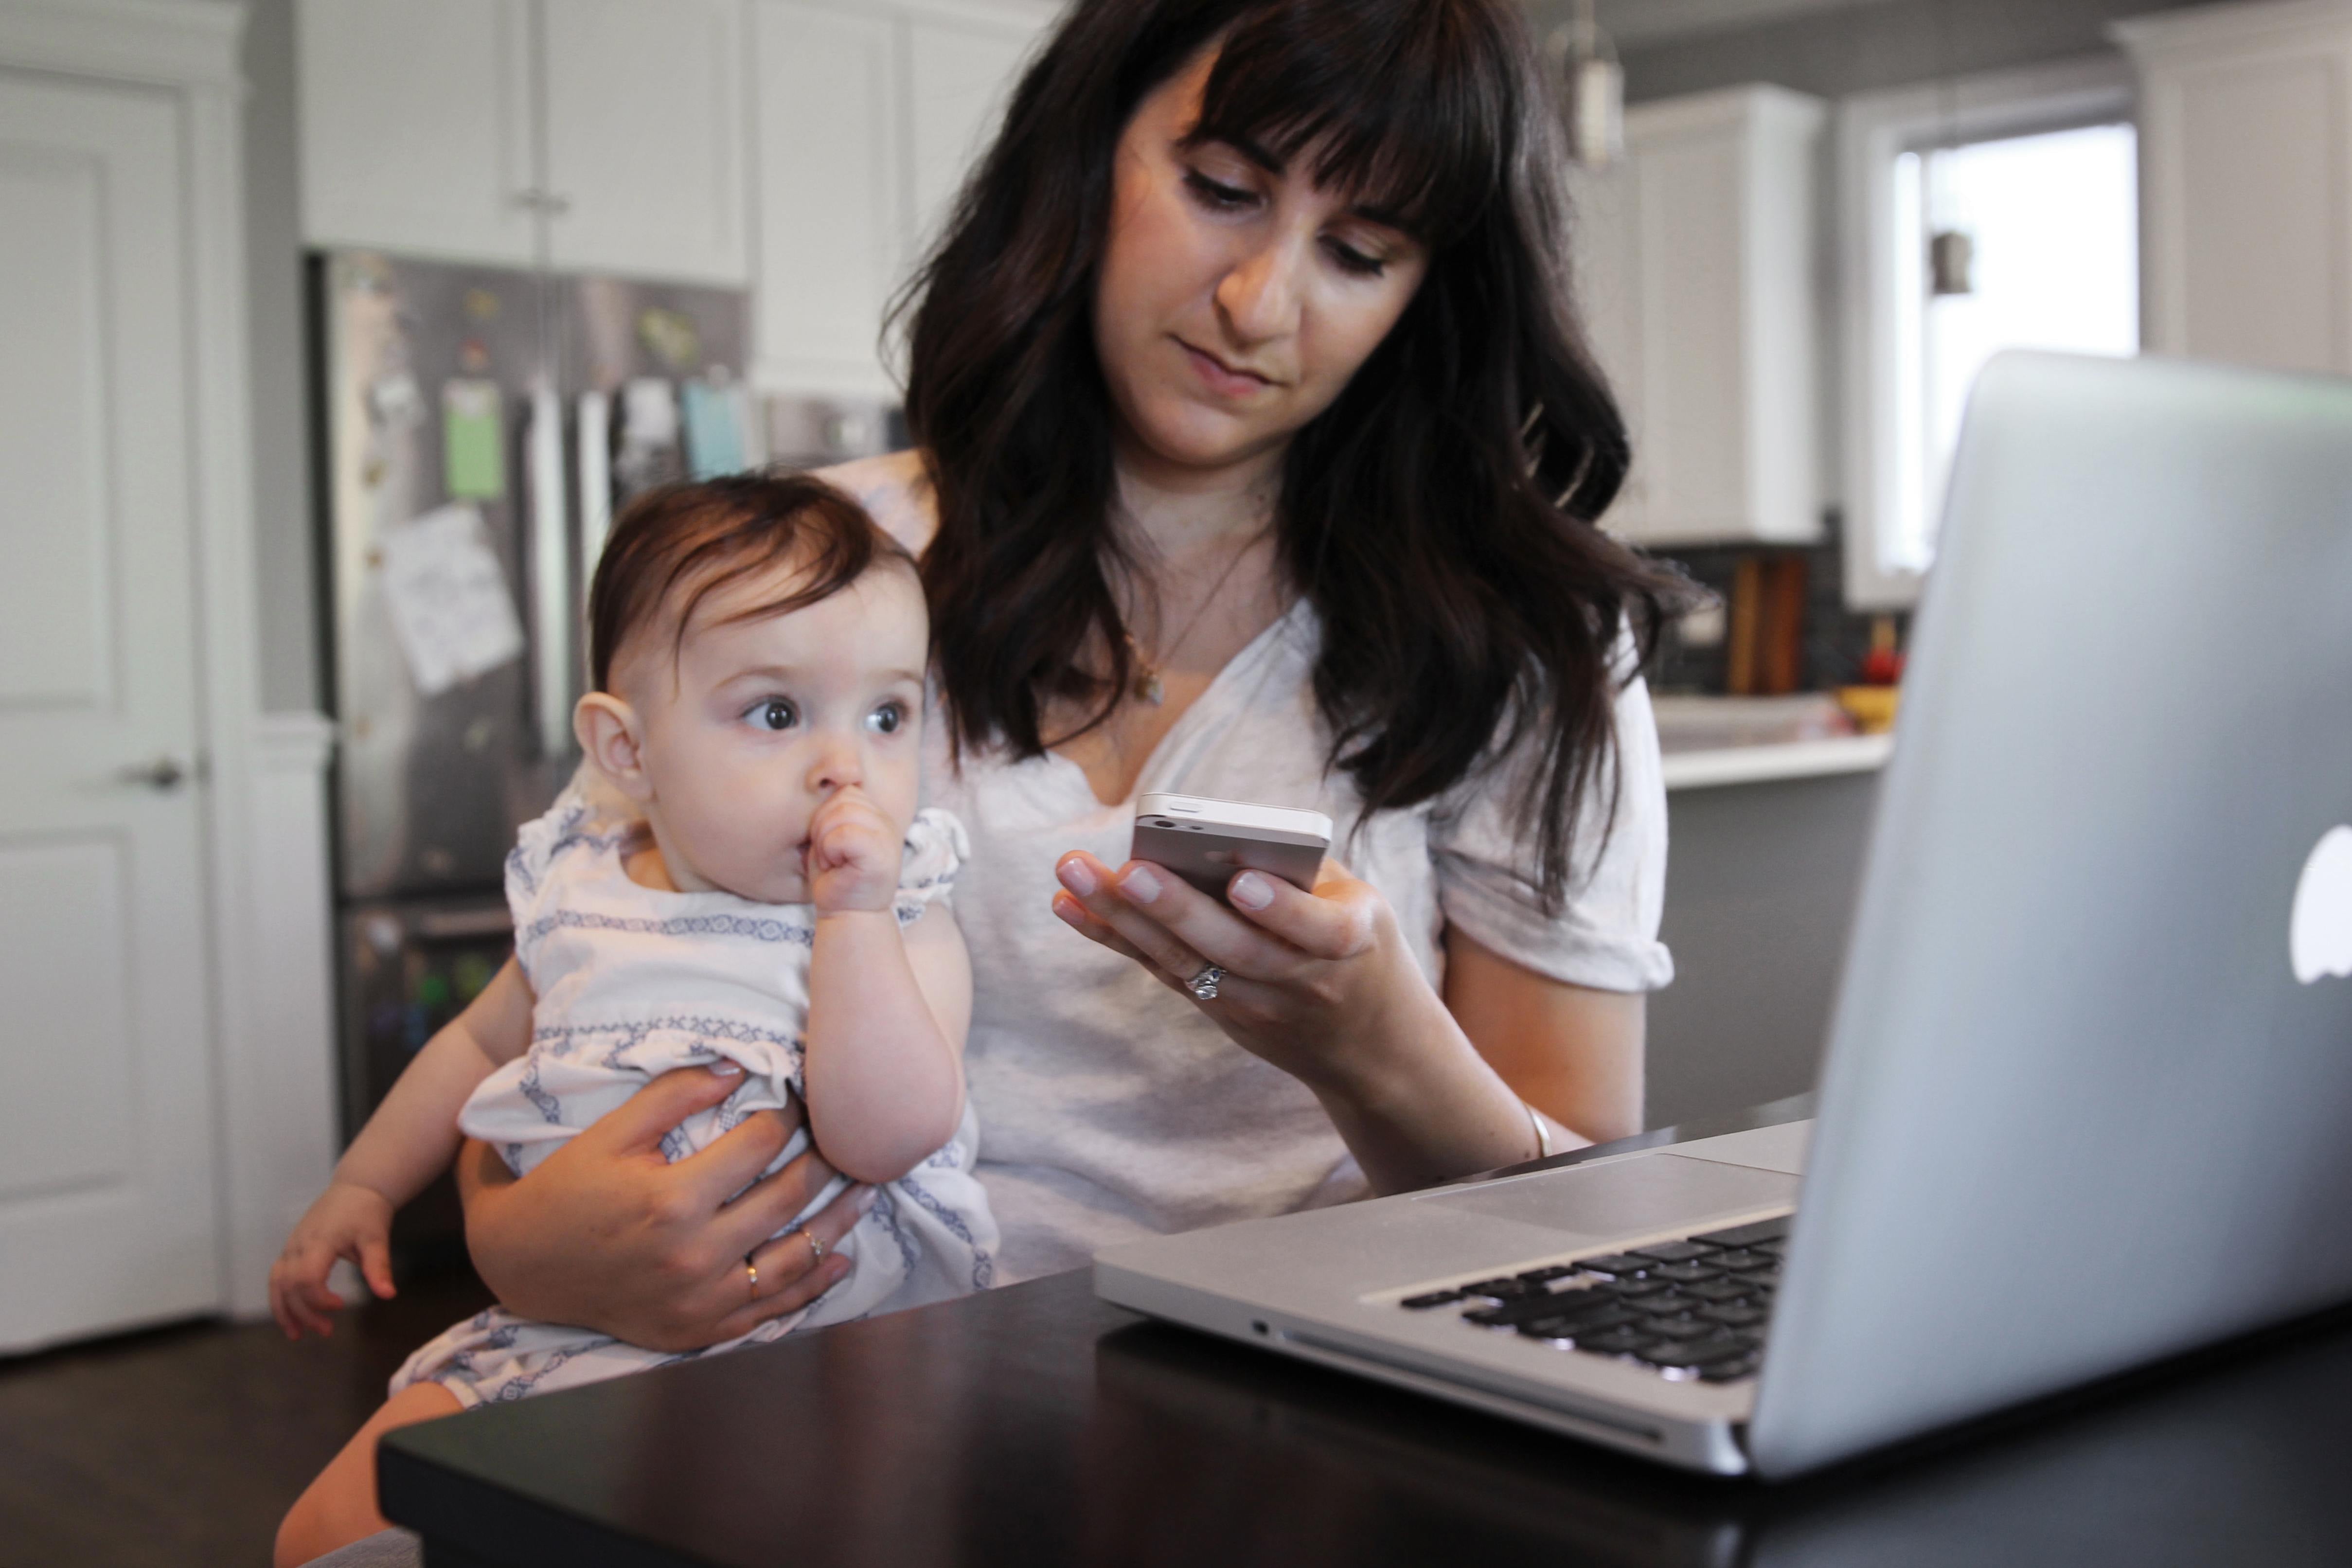 You may be a Millennial Mom